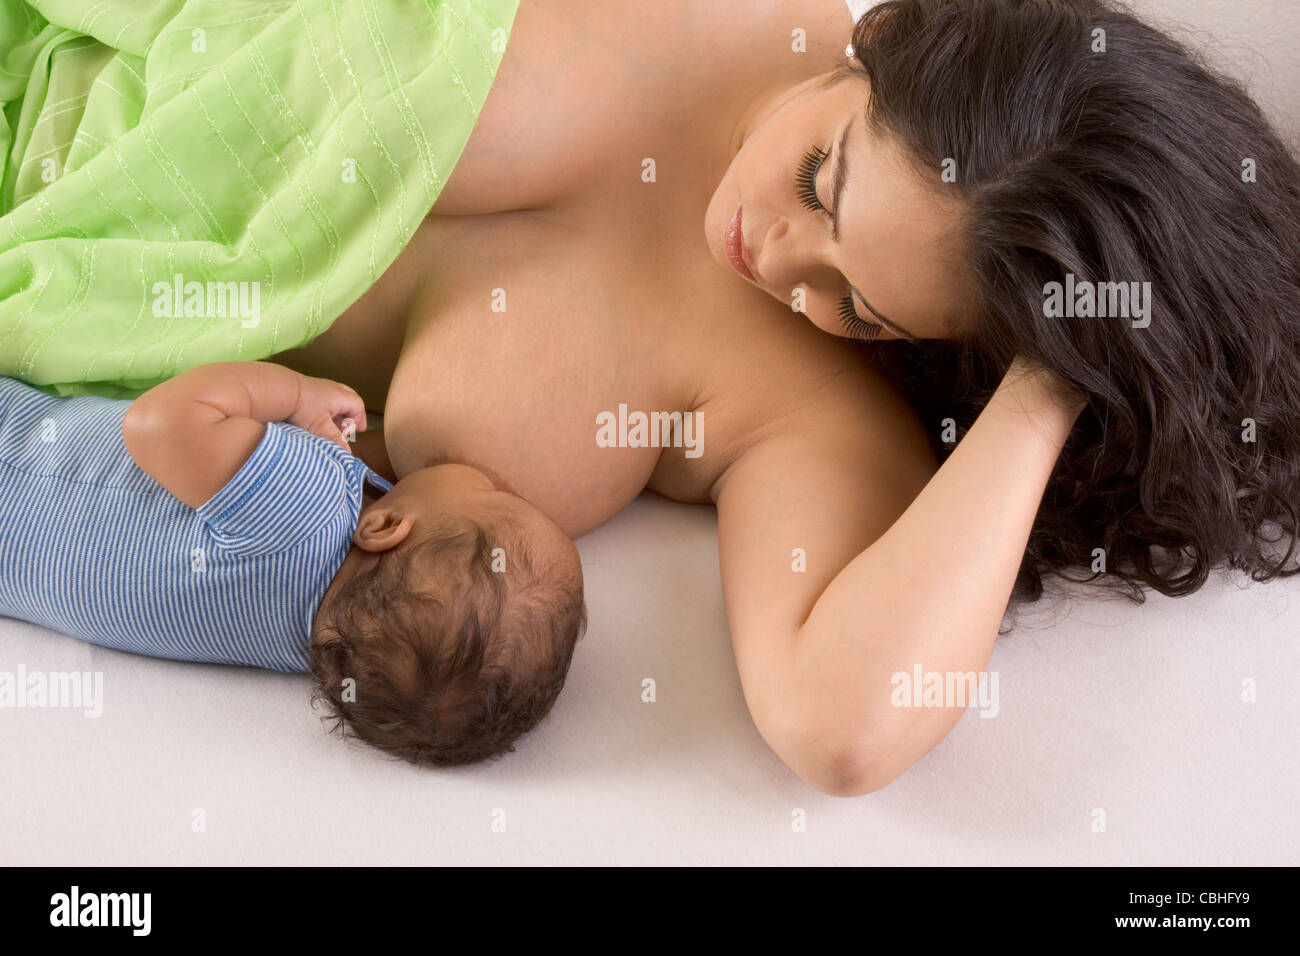 Latina woman lying on bed and breastfeeding her 2 months old baby of mixed Hispanic and African-American ethnicity Stock Photo